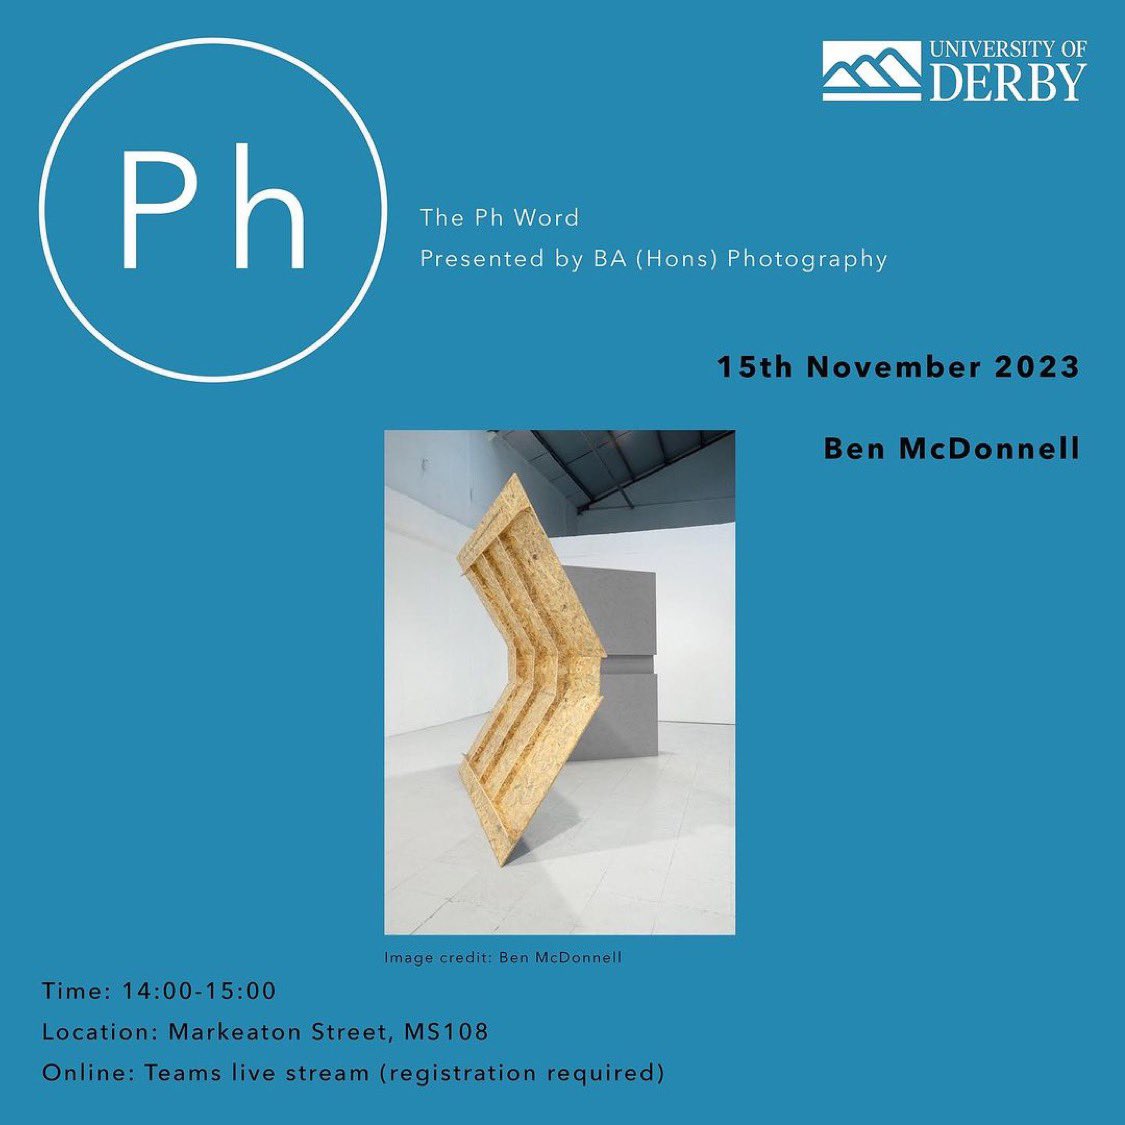 WHAT THE EFF?! 👀 The Ph Word is BACK! FREE online public access to the latest word on #photography 💥 A virtual resource for enthusiasts, school/colleges & industry. Details ➡️@derbybaphoto on Instagram Wed 15/11 2pm GMT @bcjmcdonnell All welcome! @derbyuniarts @DerbyUni